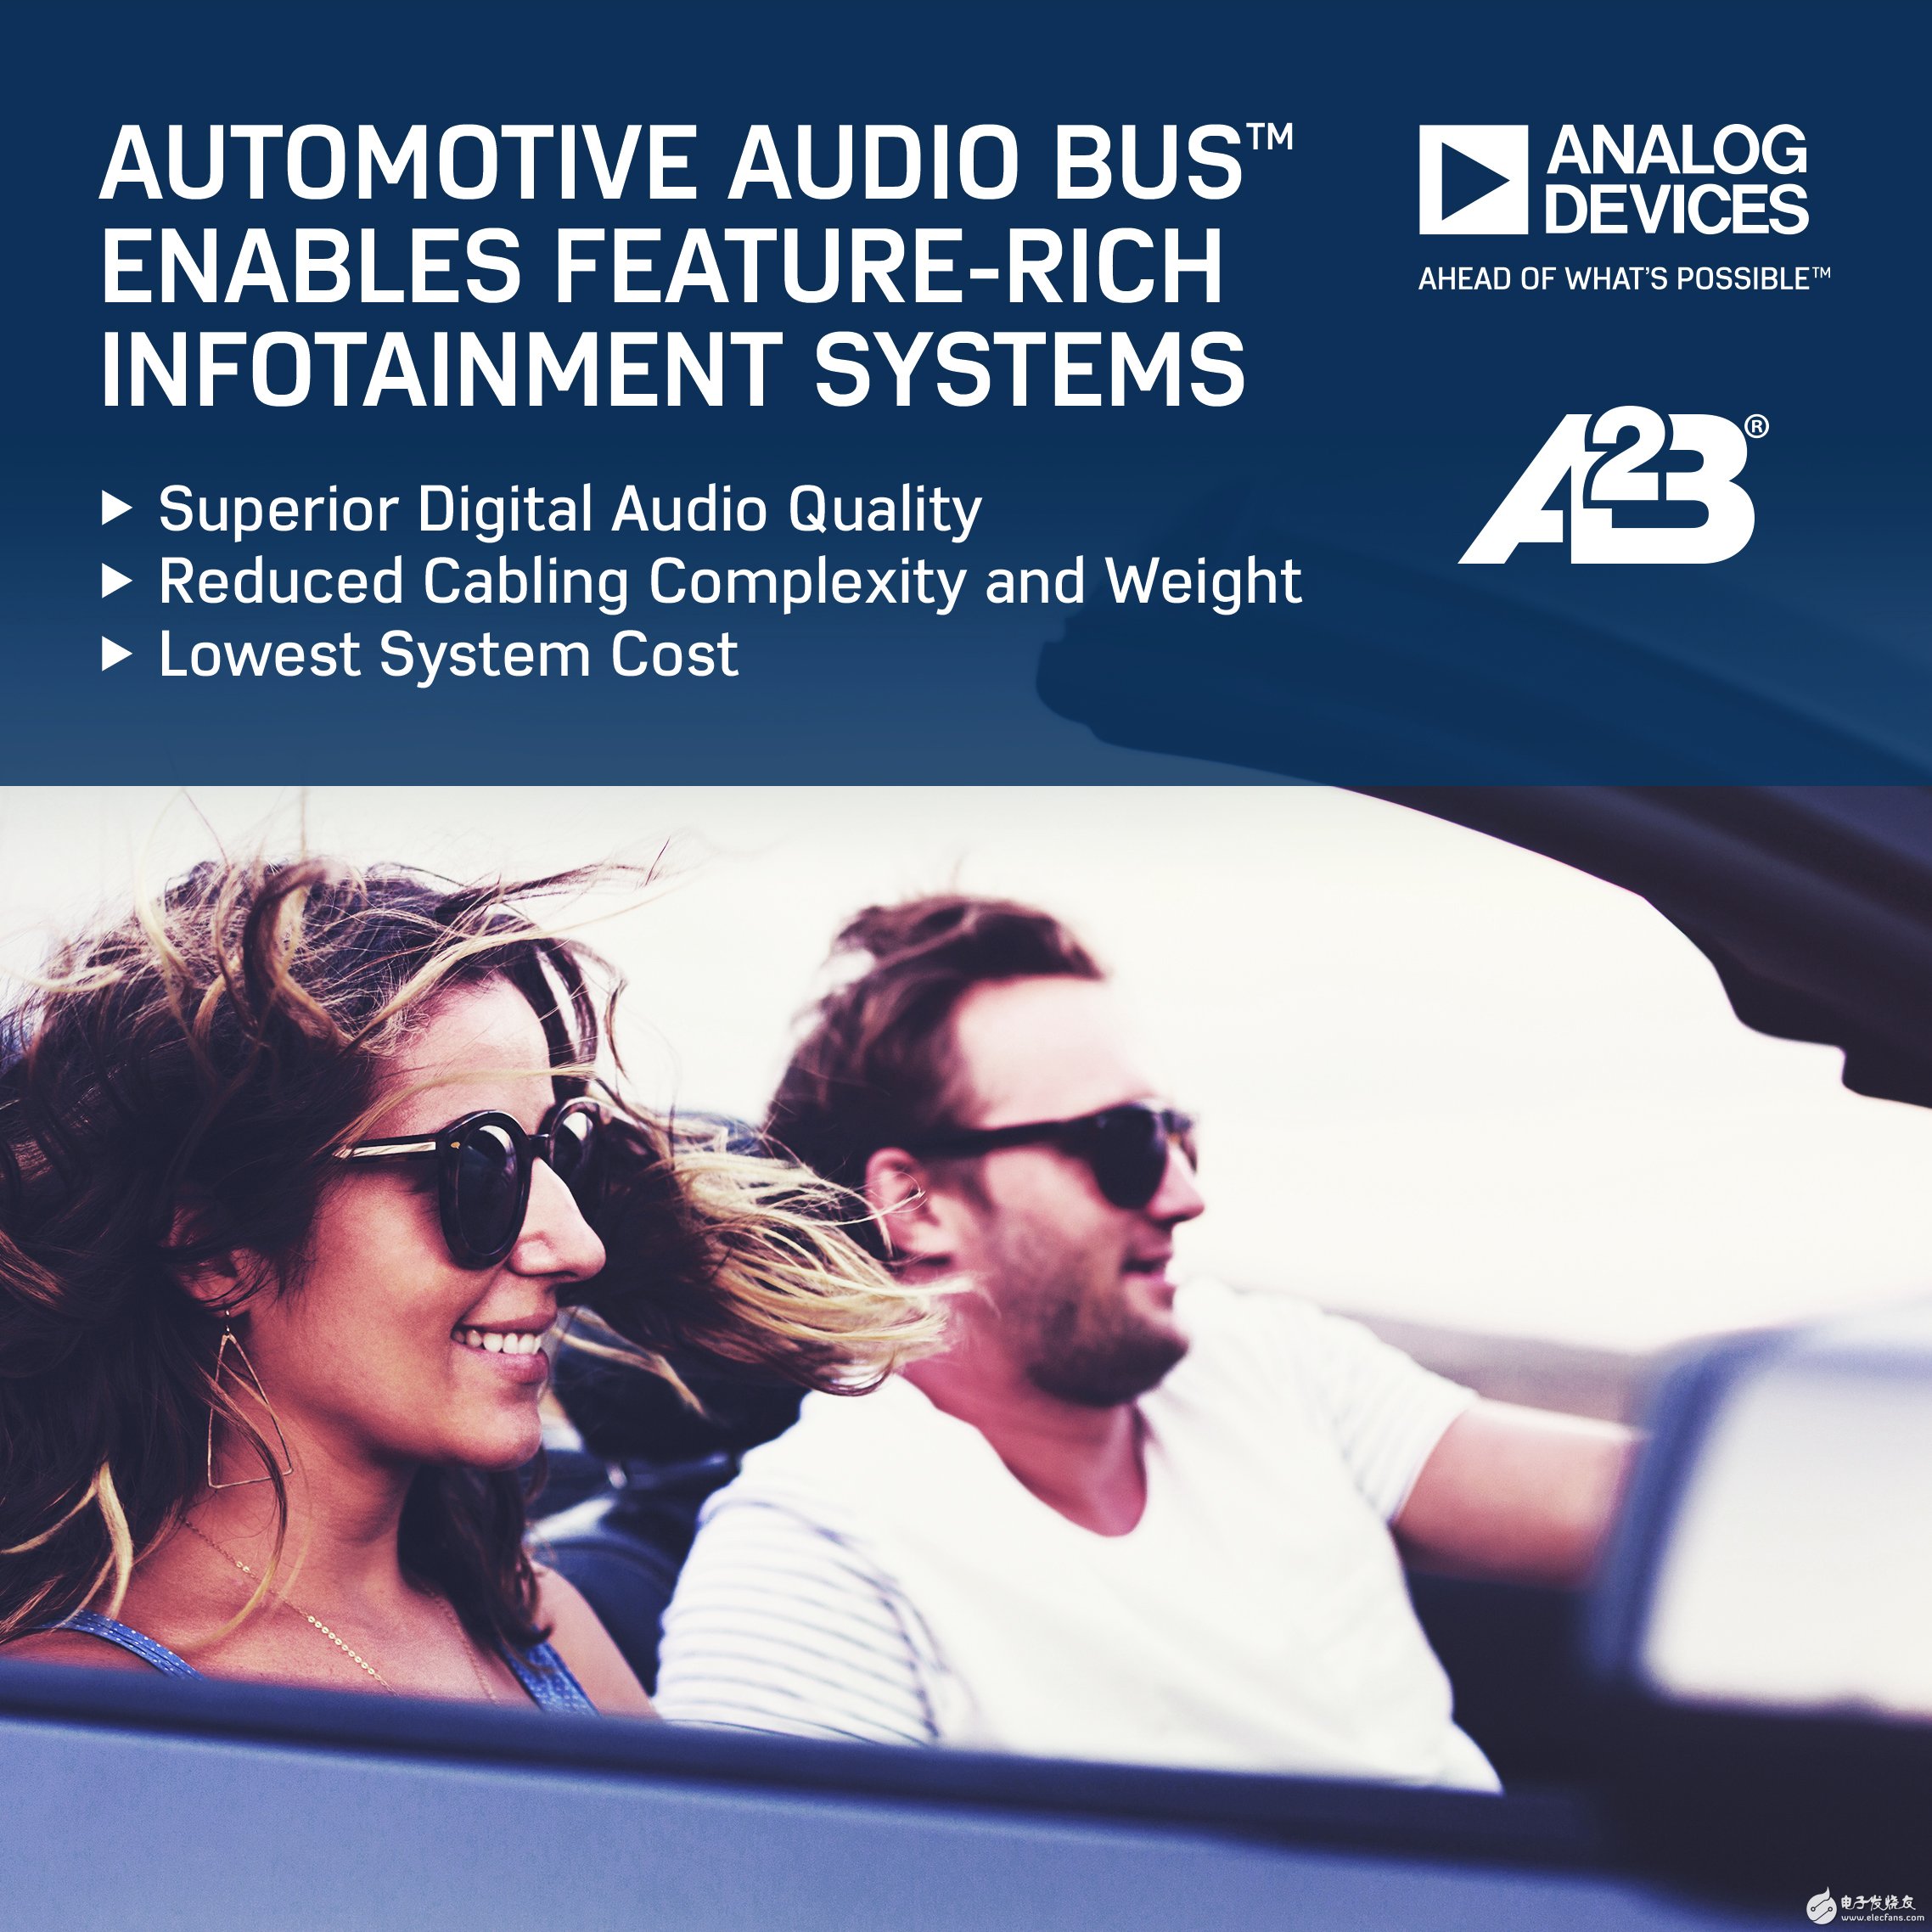 Ford Motor Company infotainment system will use ADI's car audio bus